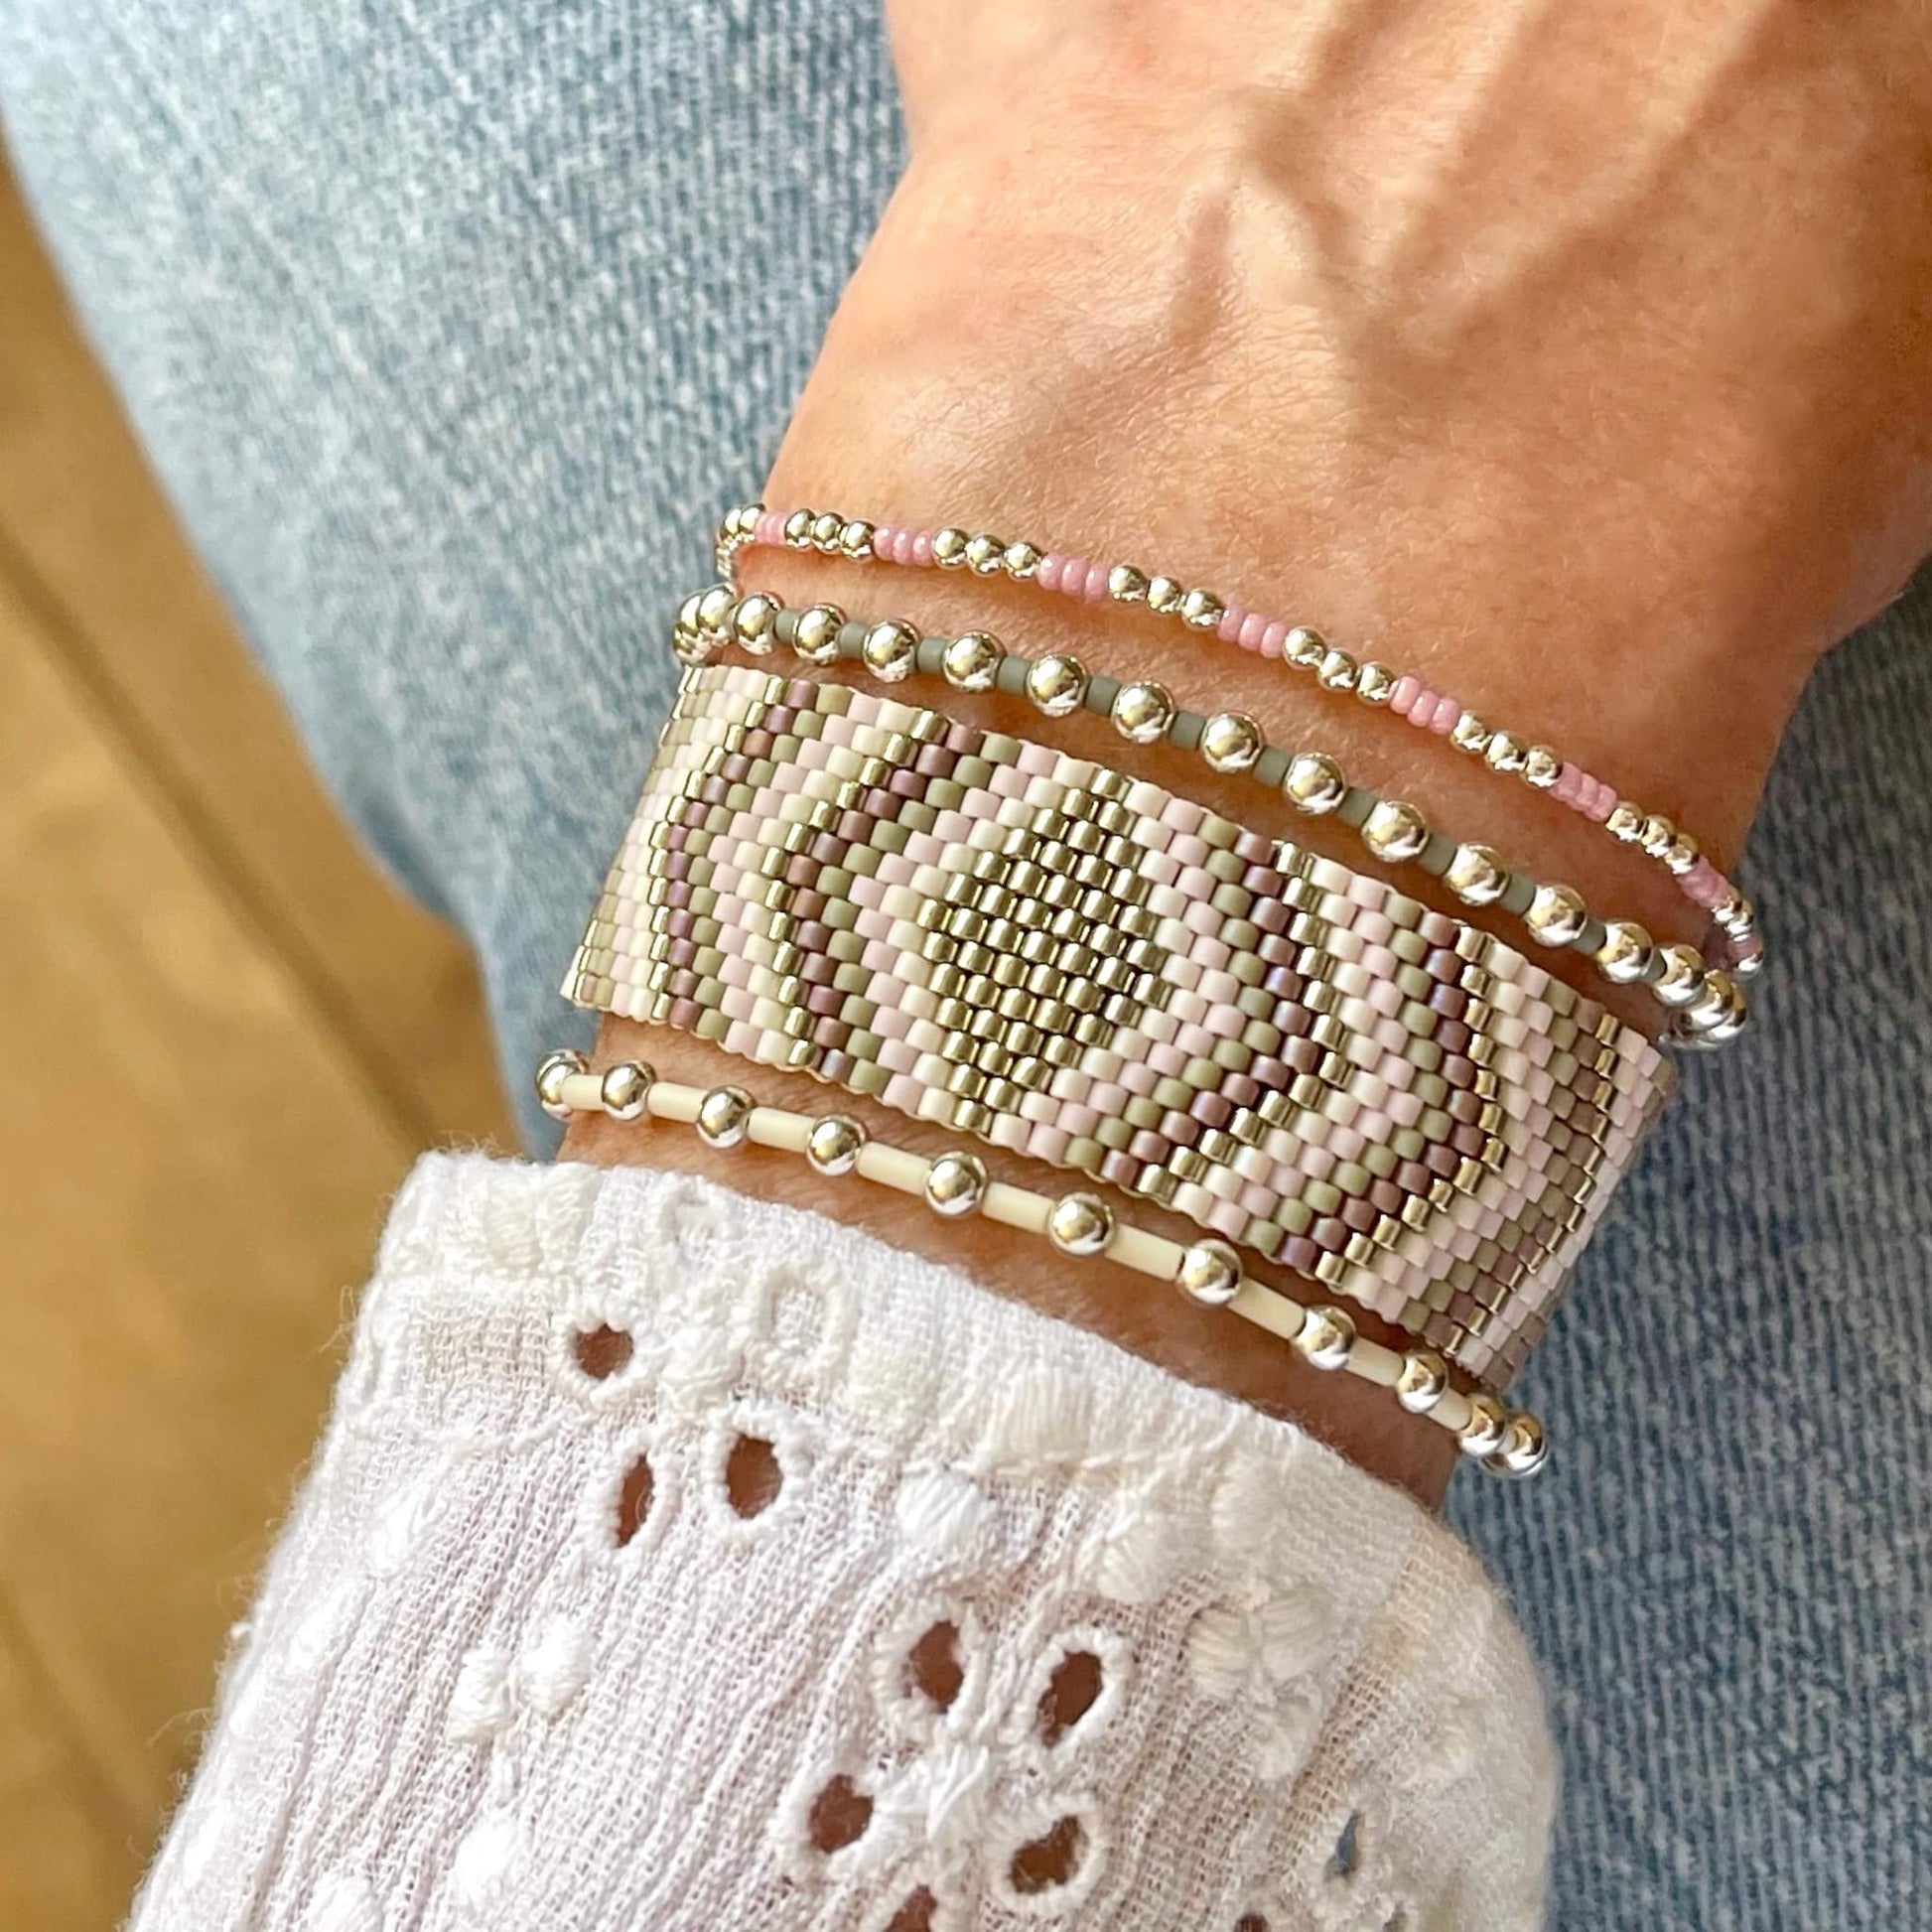 Flat beaded bracelet in silver, mauve, lavender, and gray diamond and chevron peyote pattern, with 2 sterling and glass bead stretch bracelets.